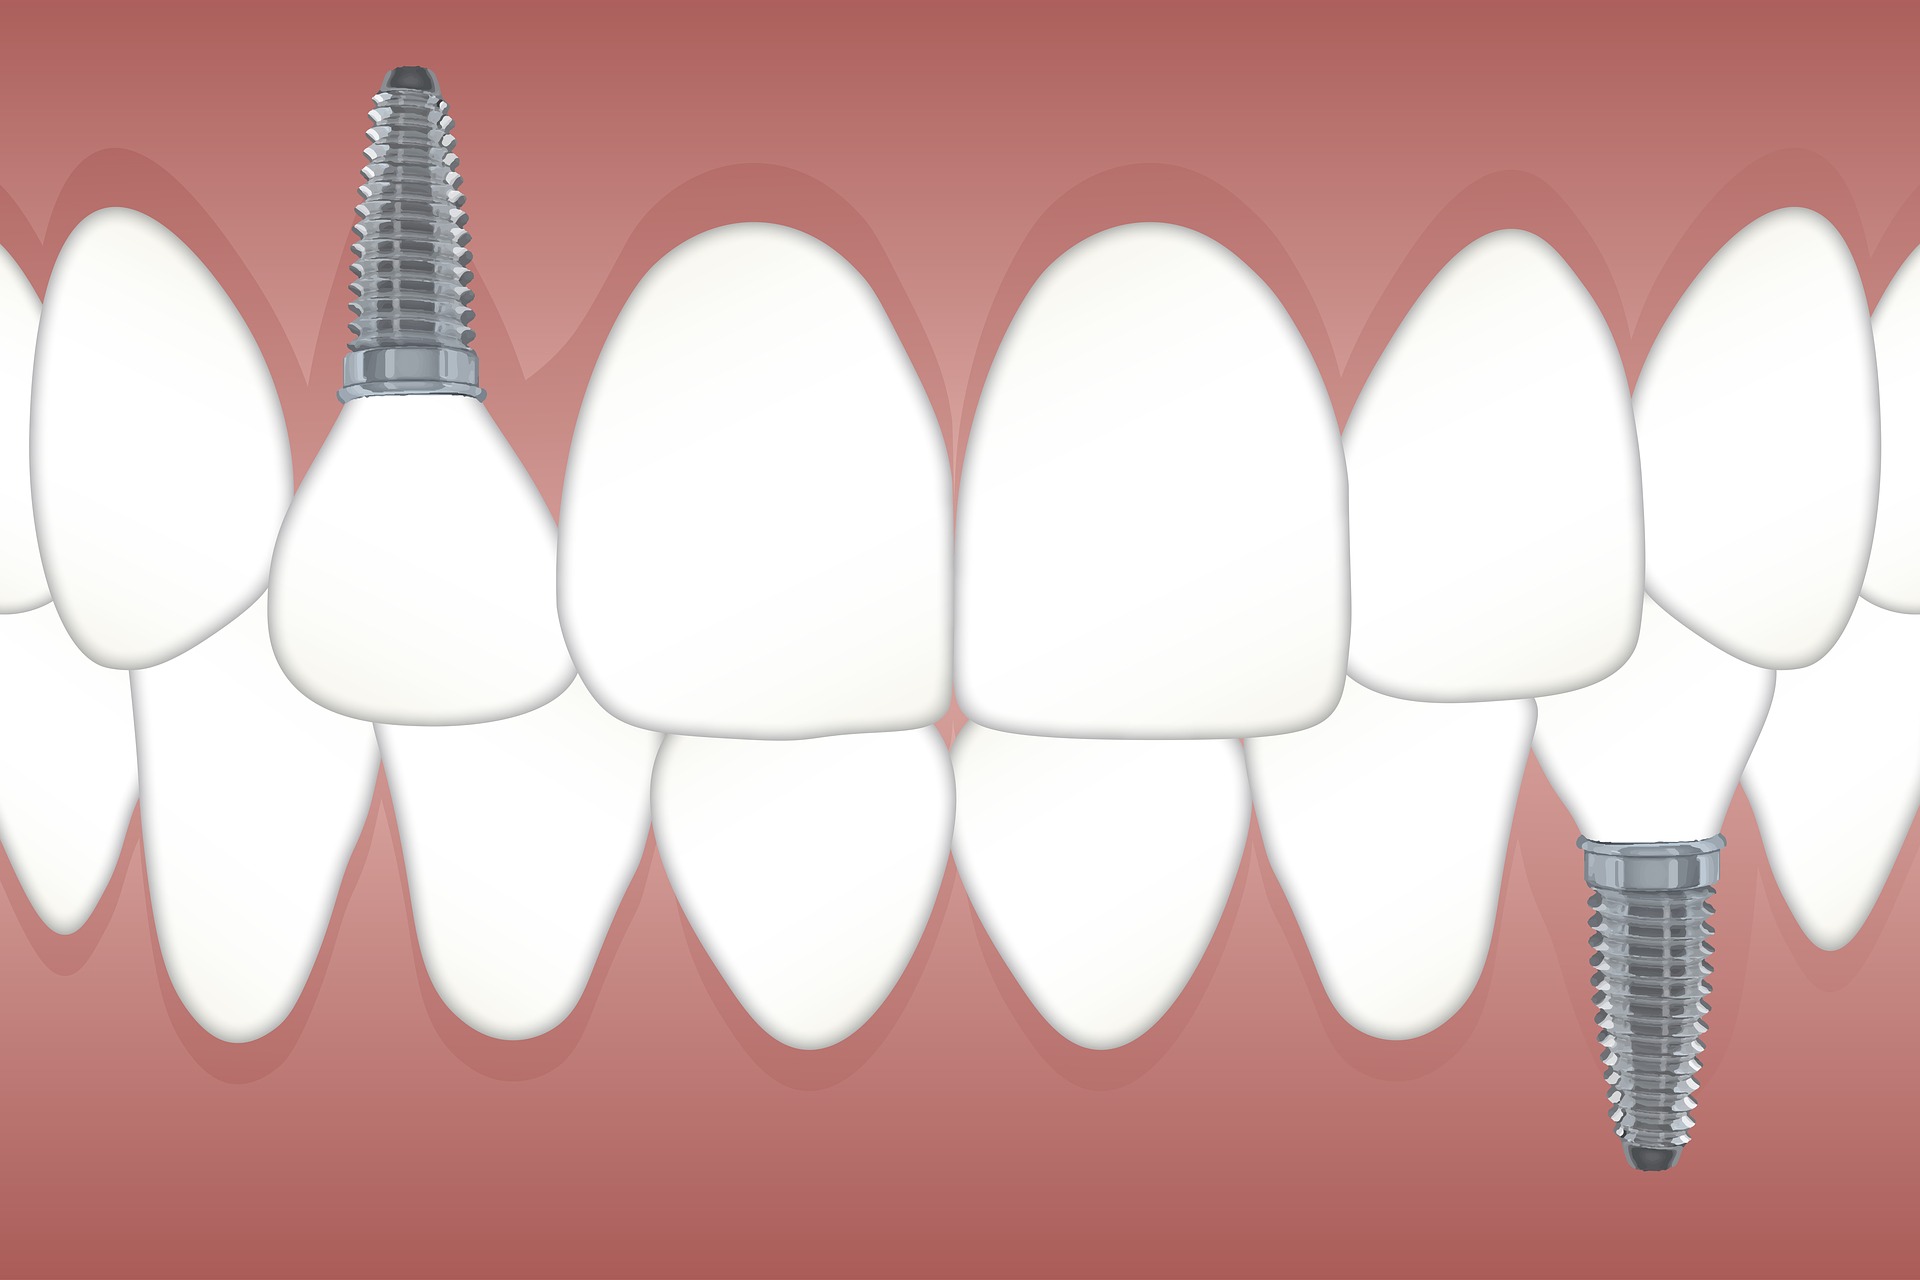 schematic representation of a dental implant